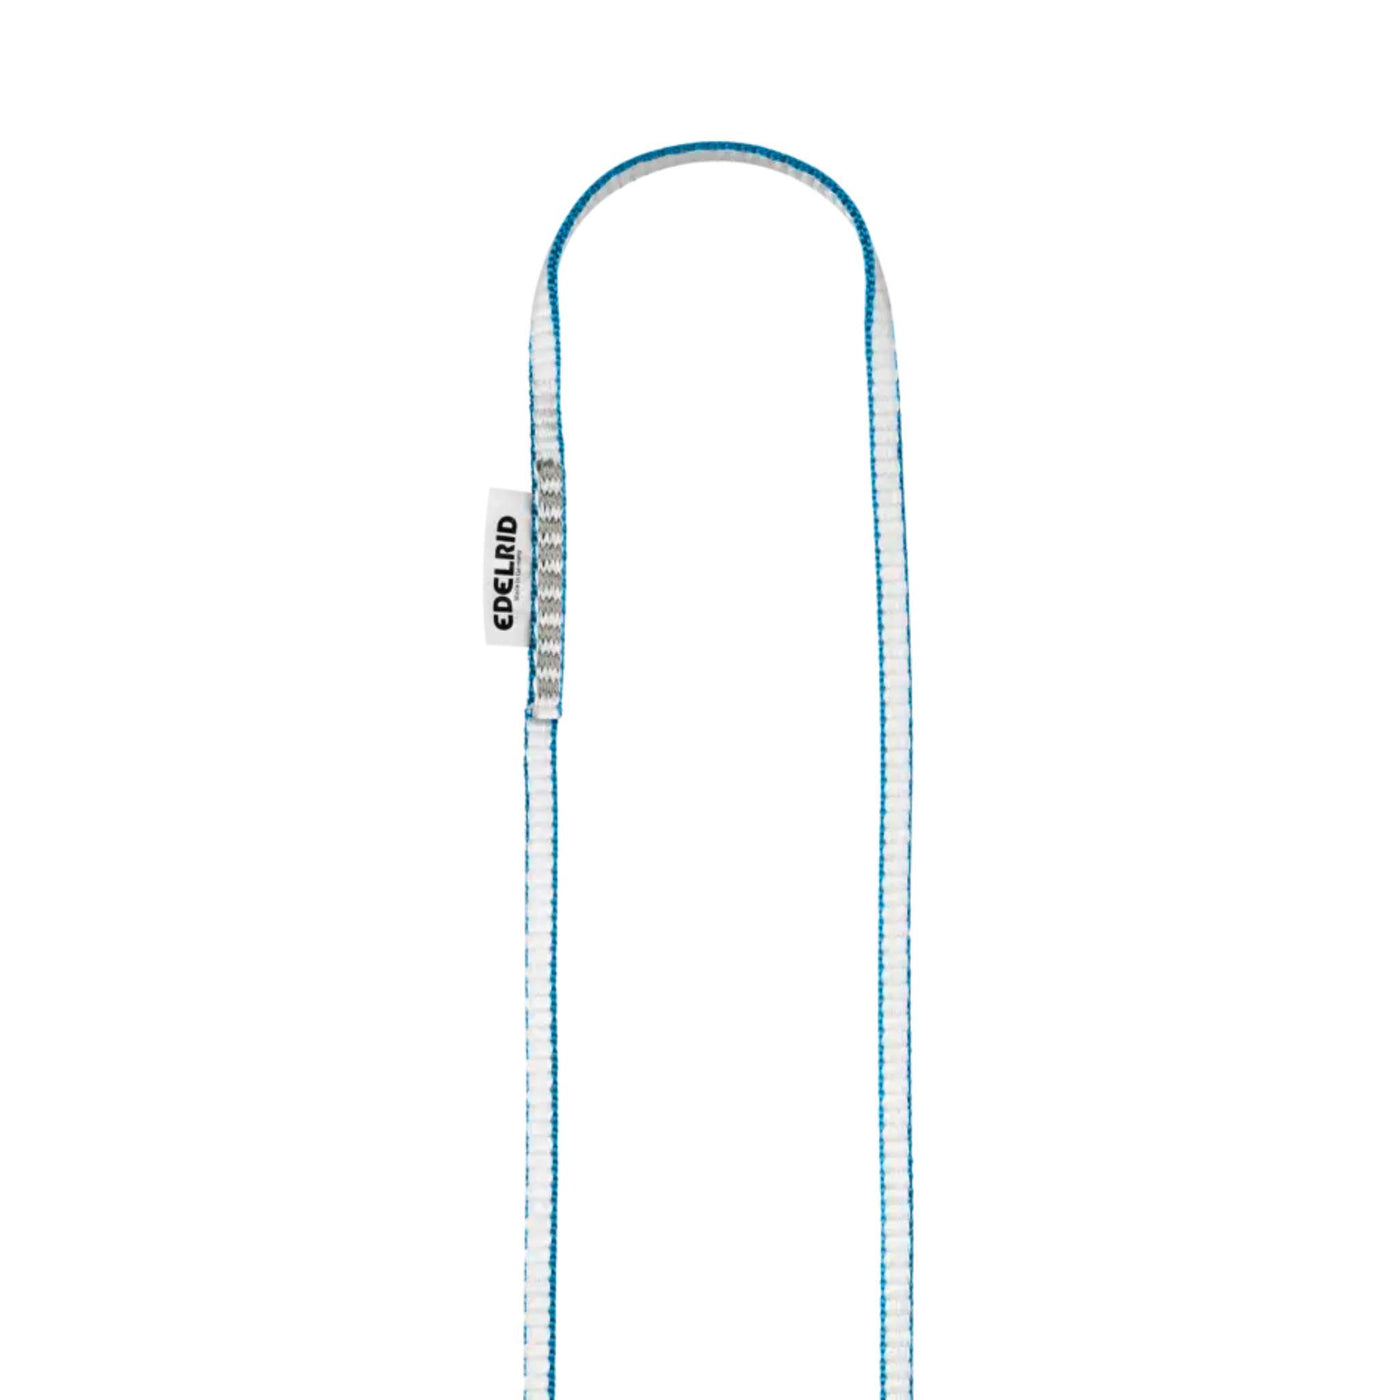 Edelrid Dyneema Sling ll 8mm 120cm | Slings and Webbing | Further Faster Christchurch NZ #icemint